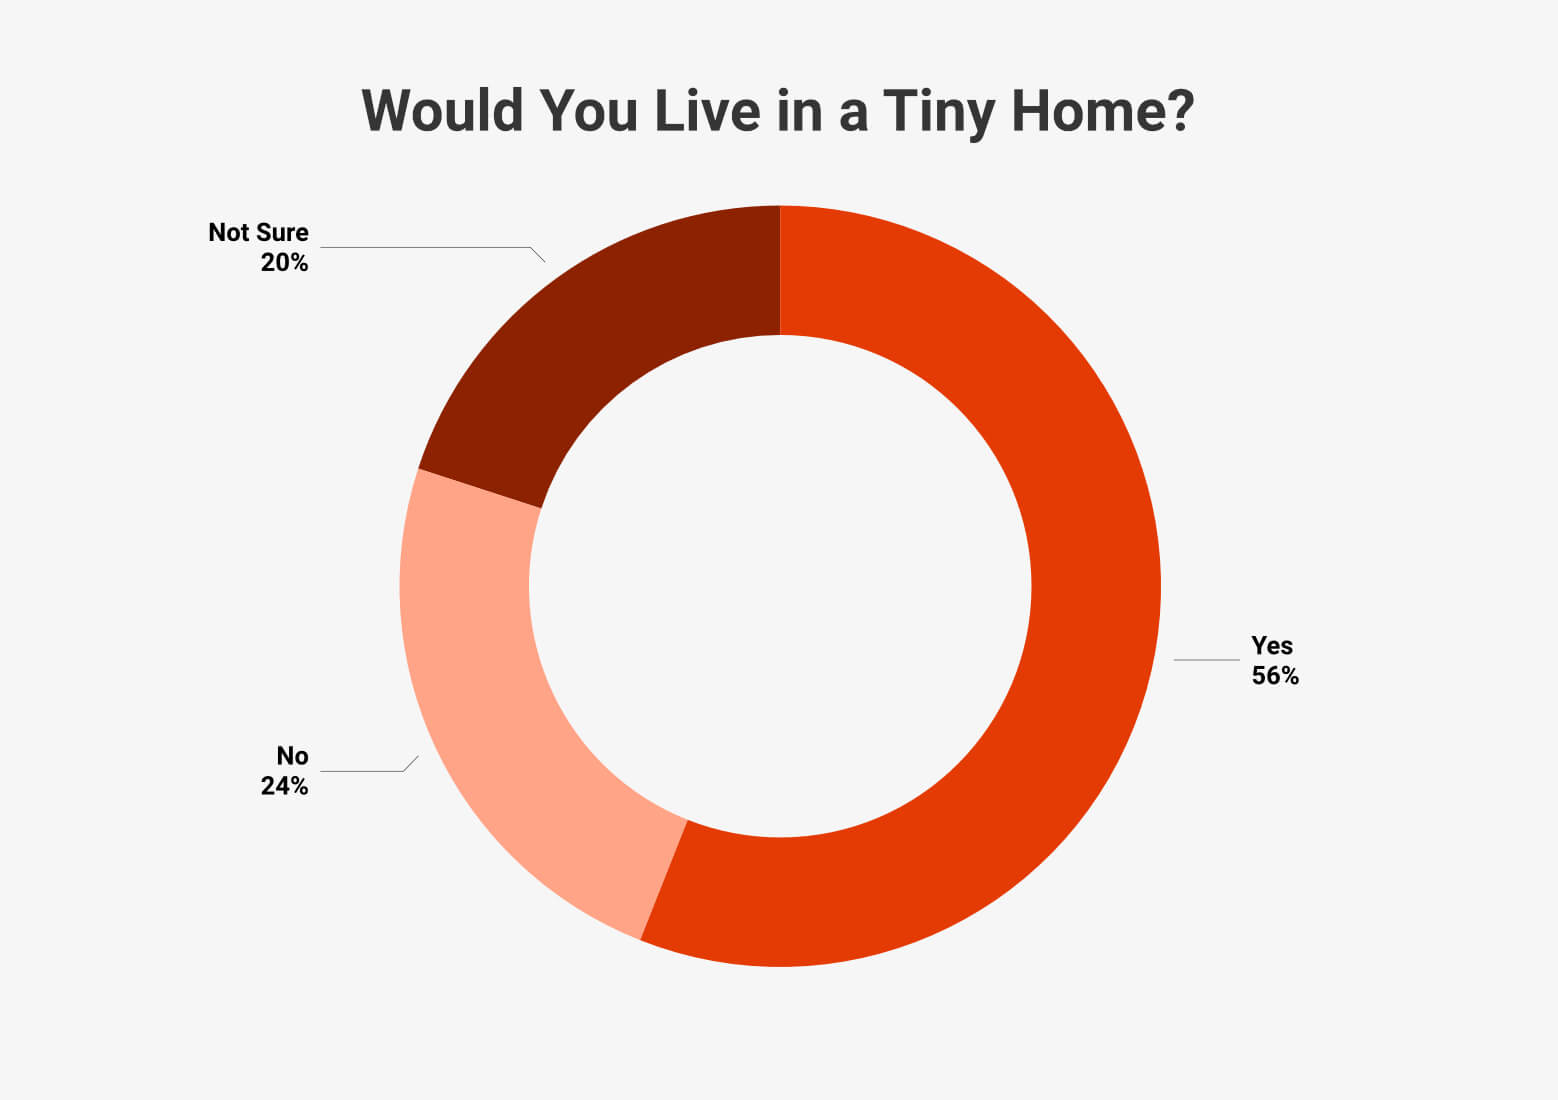 Would You Live in a Tiny Home